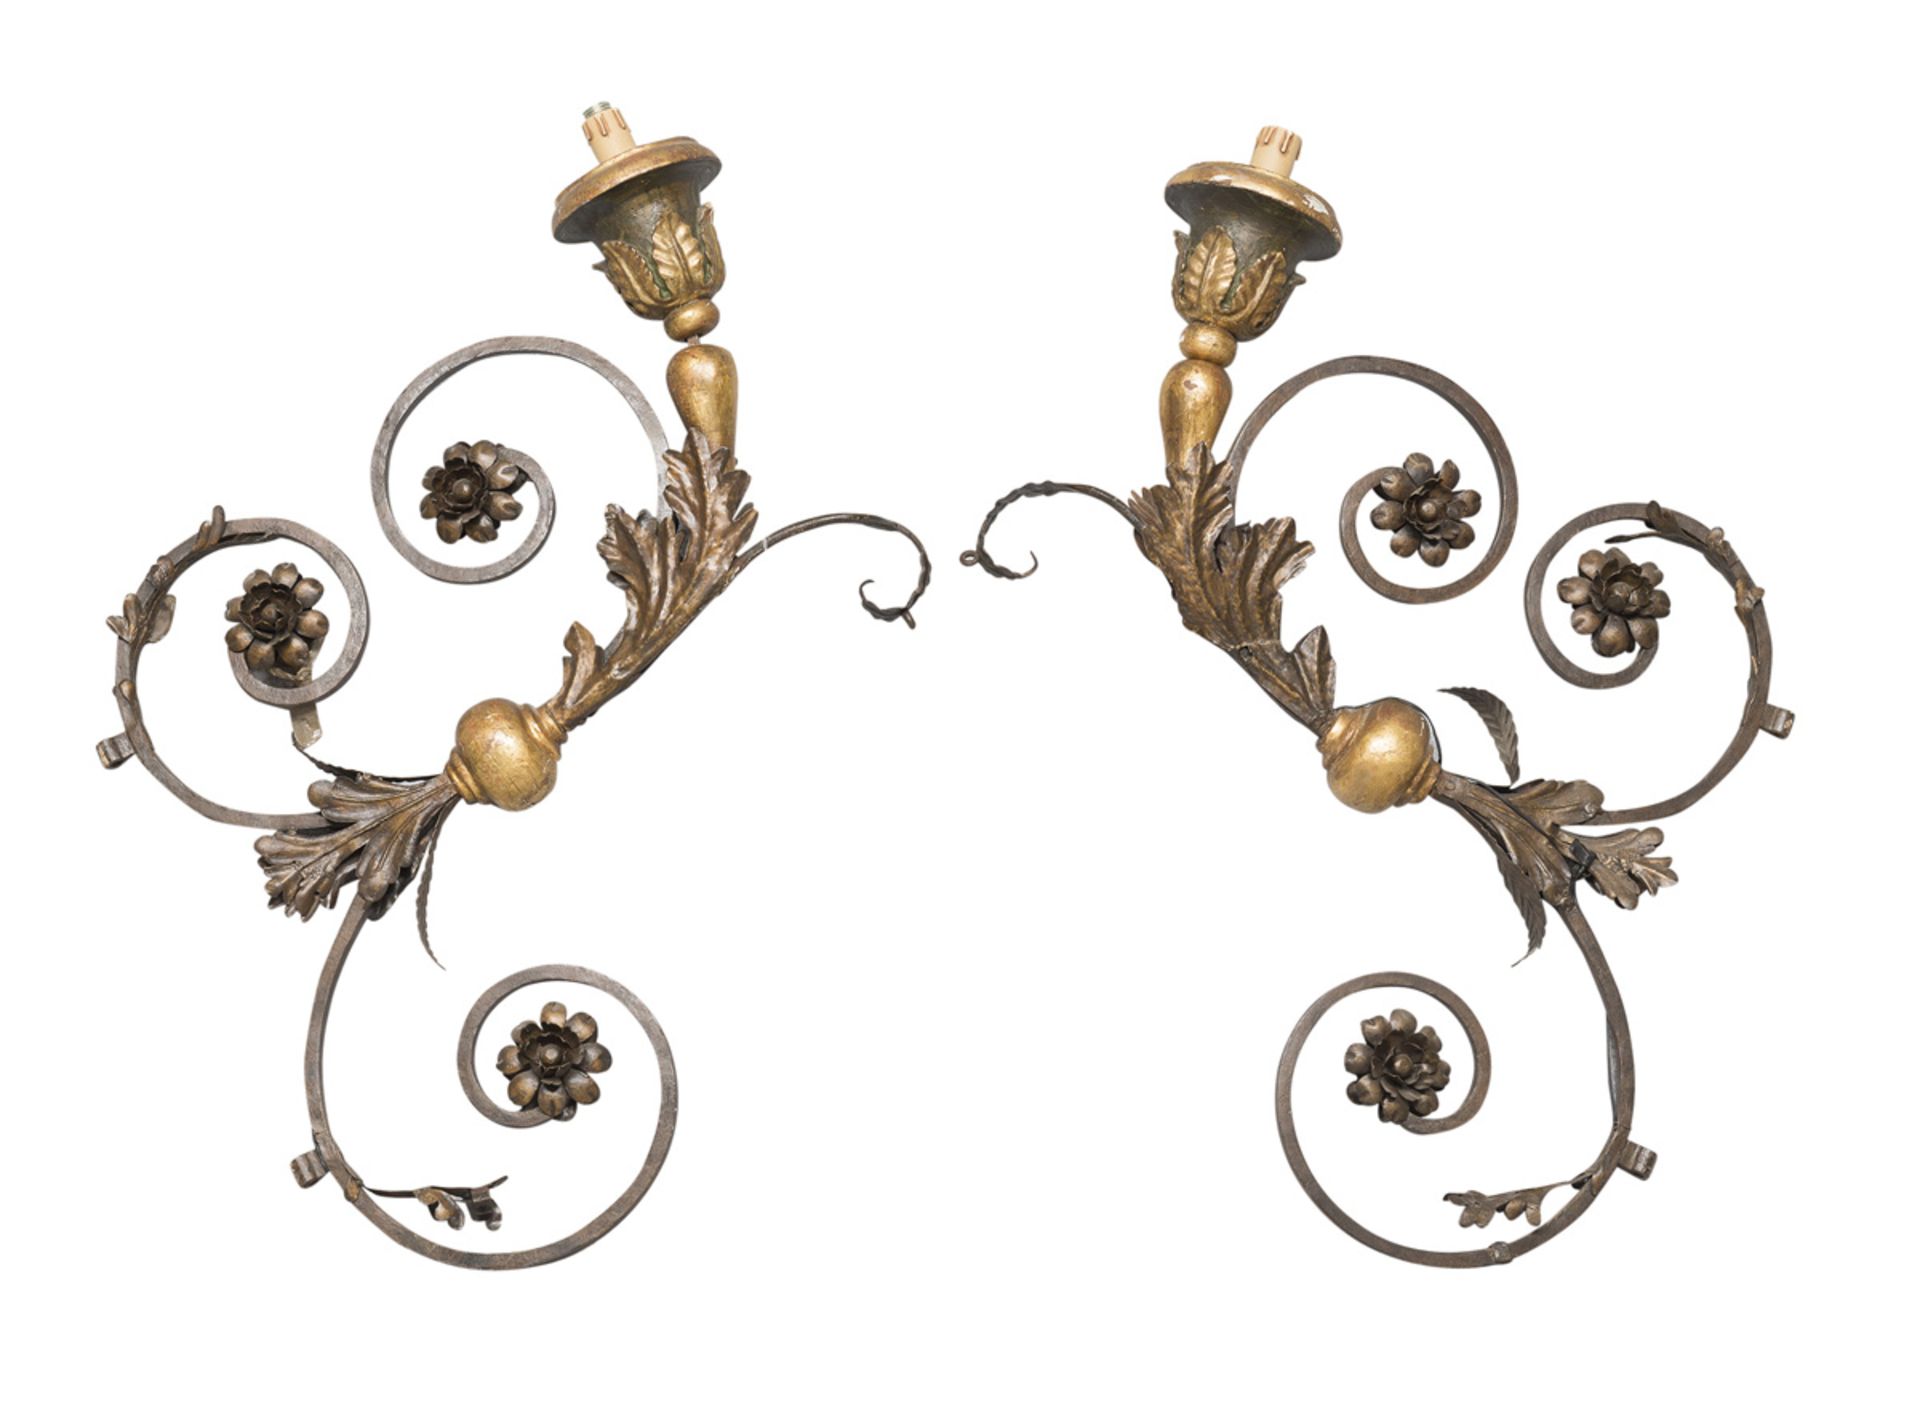 A PAIR OF LARGE WALL ARMS IN WROUGHT IRON, 19TH CENTURY